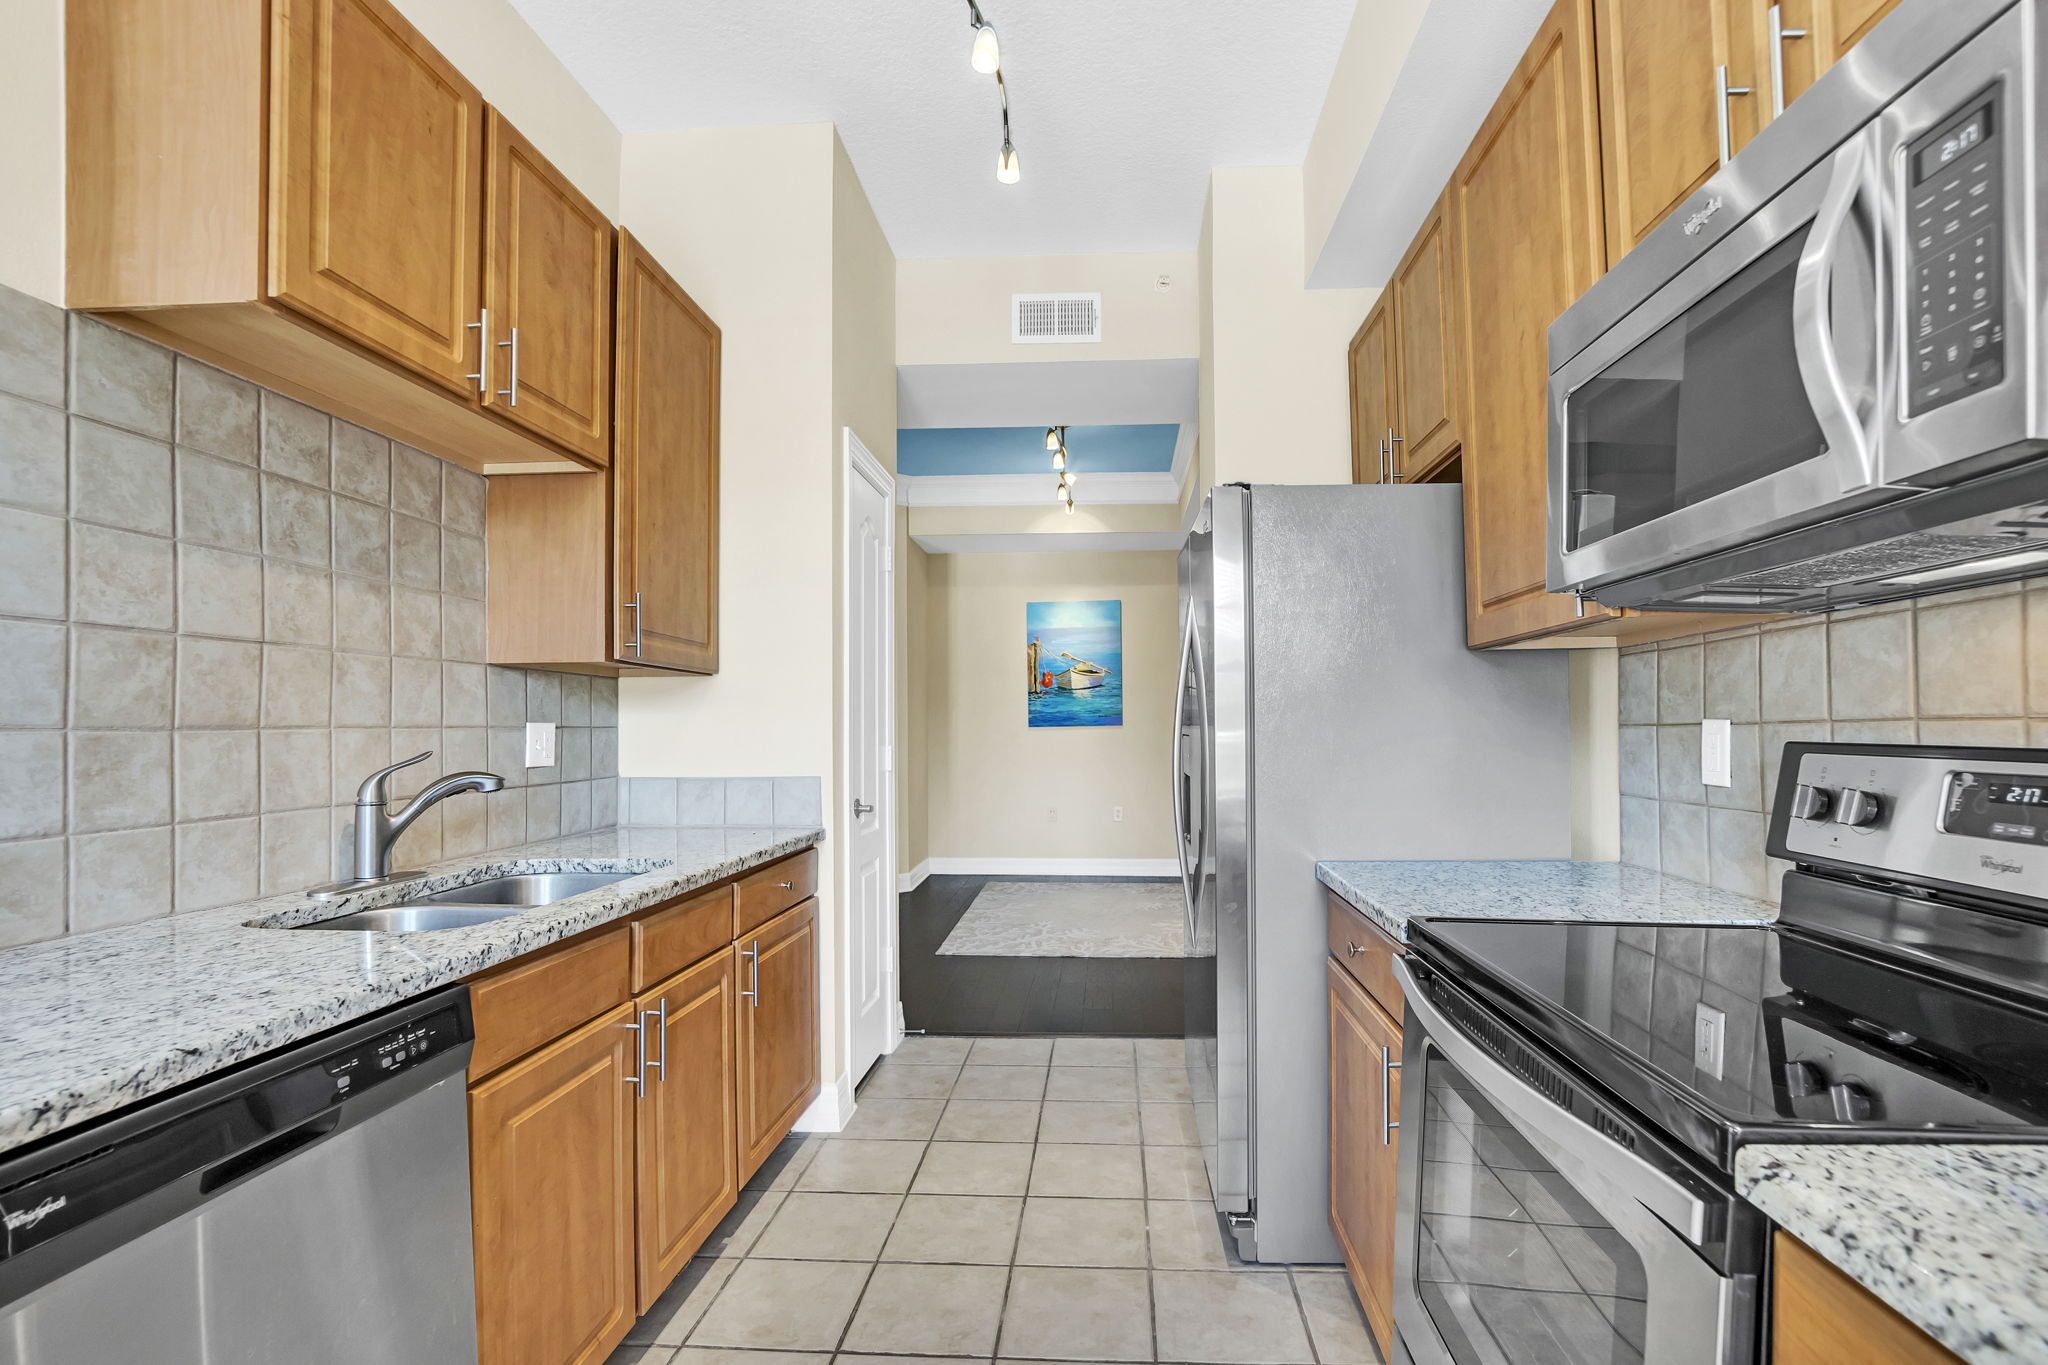 Stainless Steel Appliances, Granite Counters